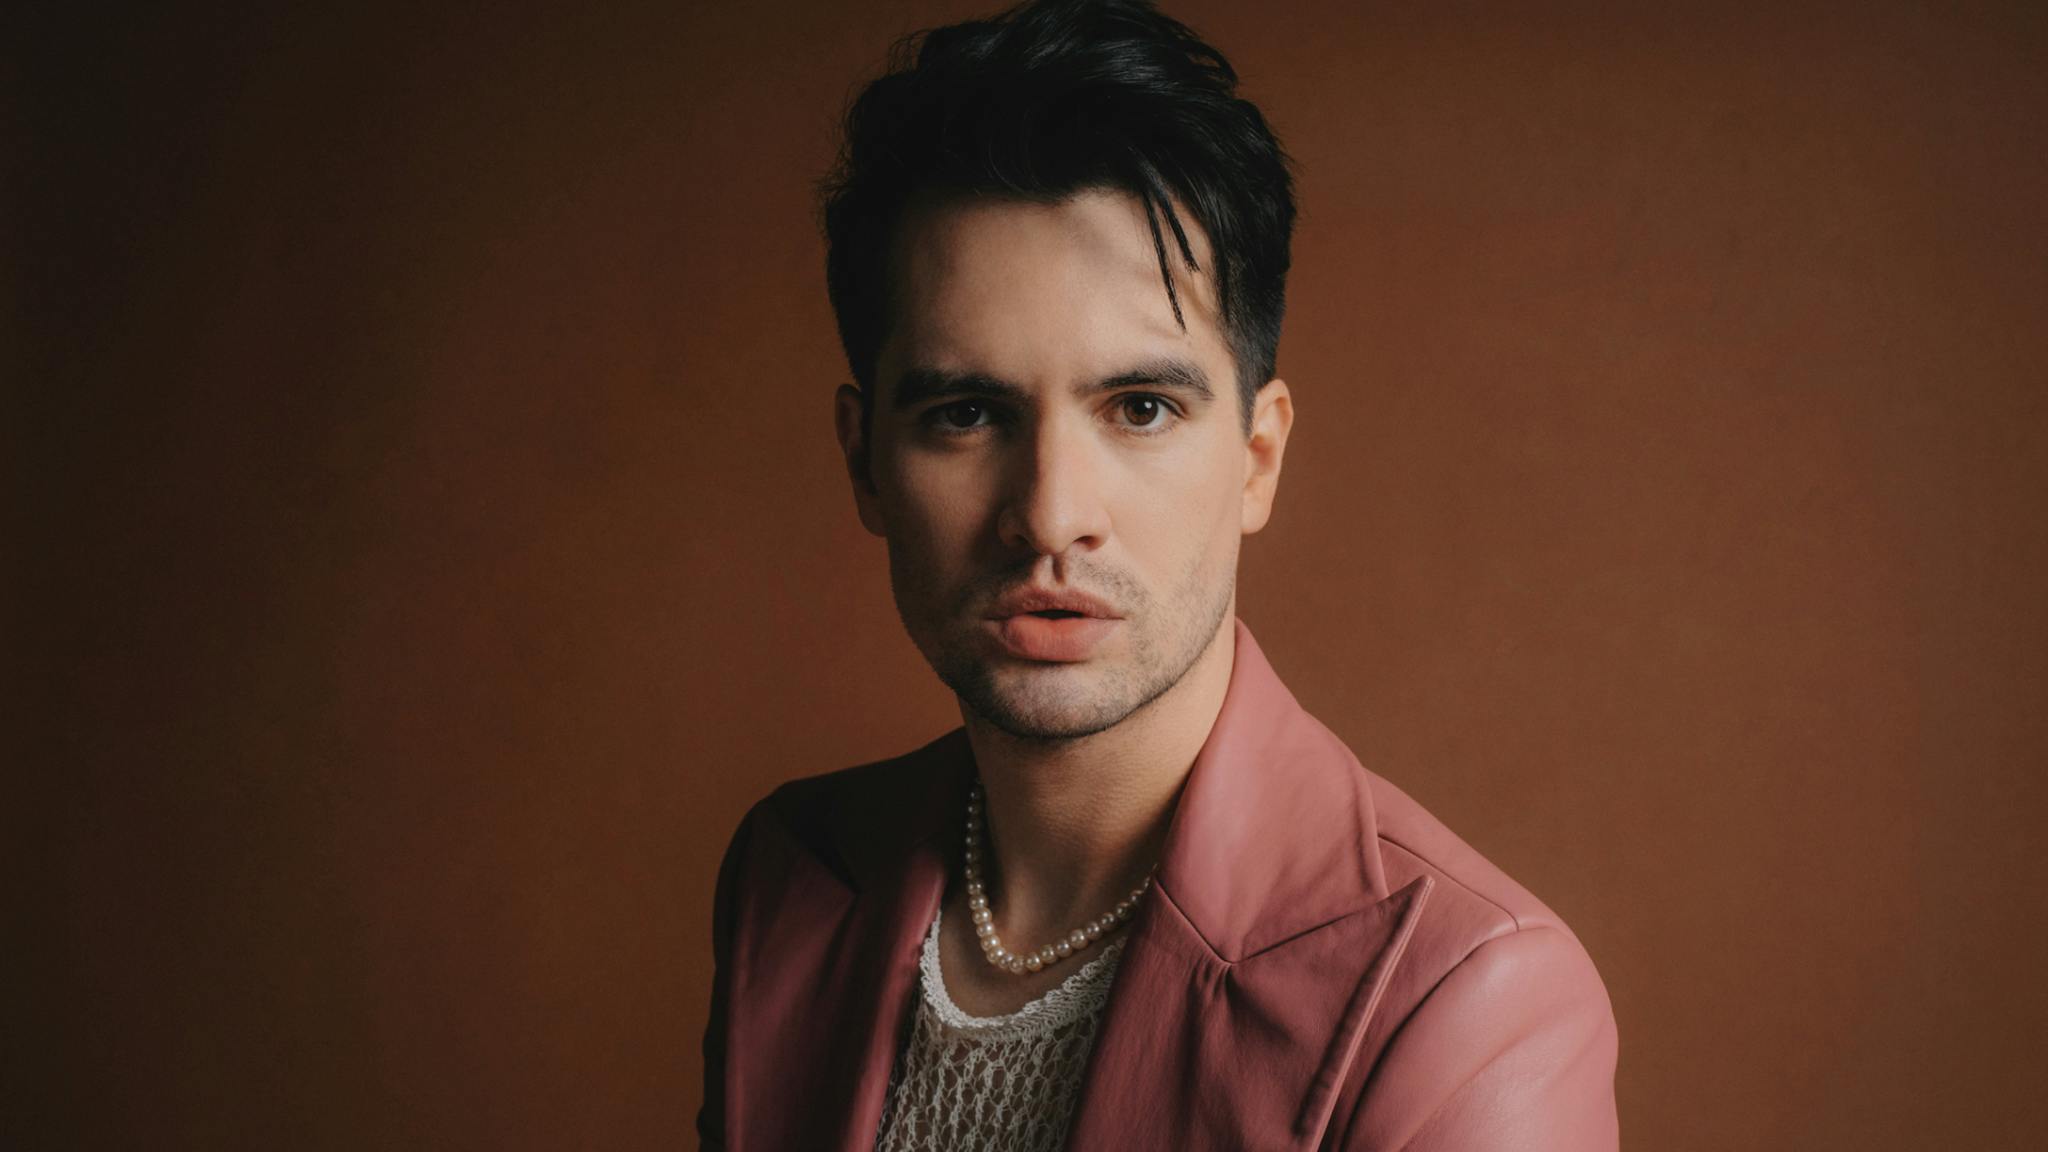 Brendon Urie reflects on Panic!’s early days in new single Local God